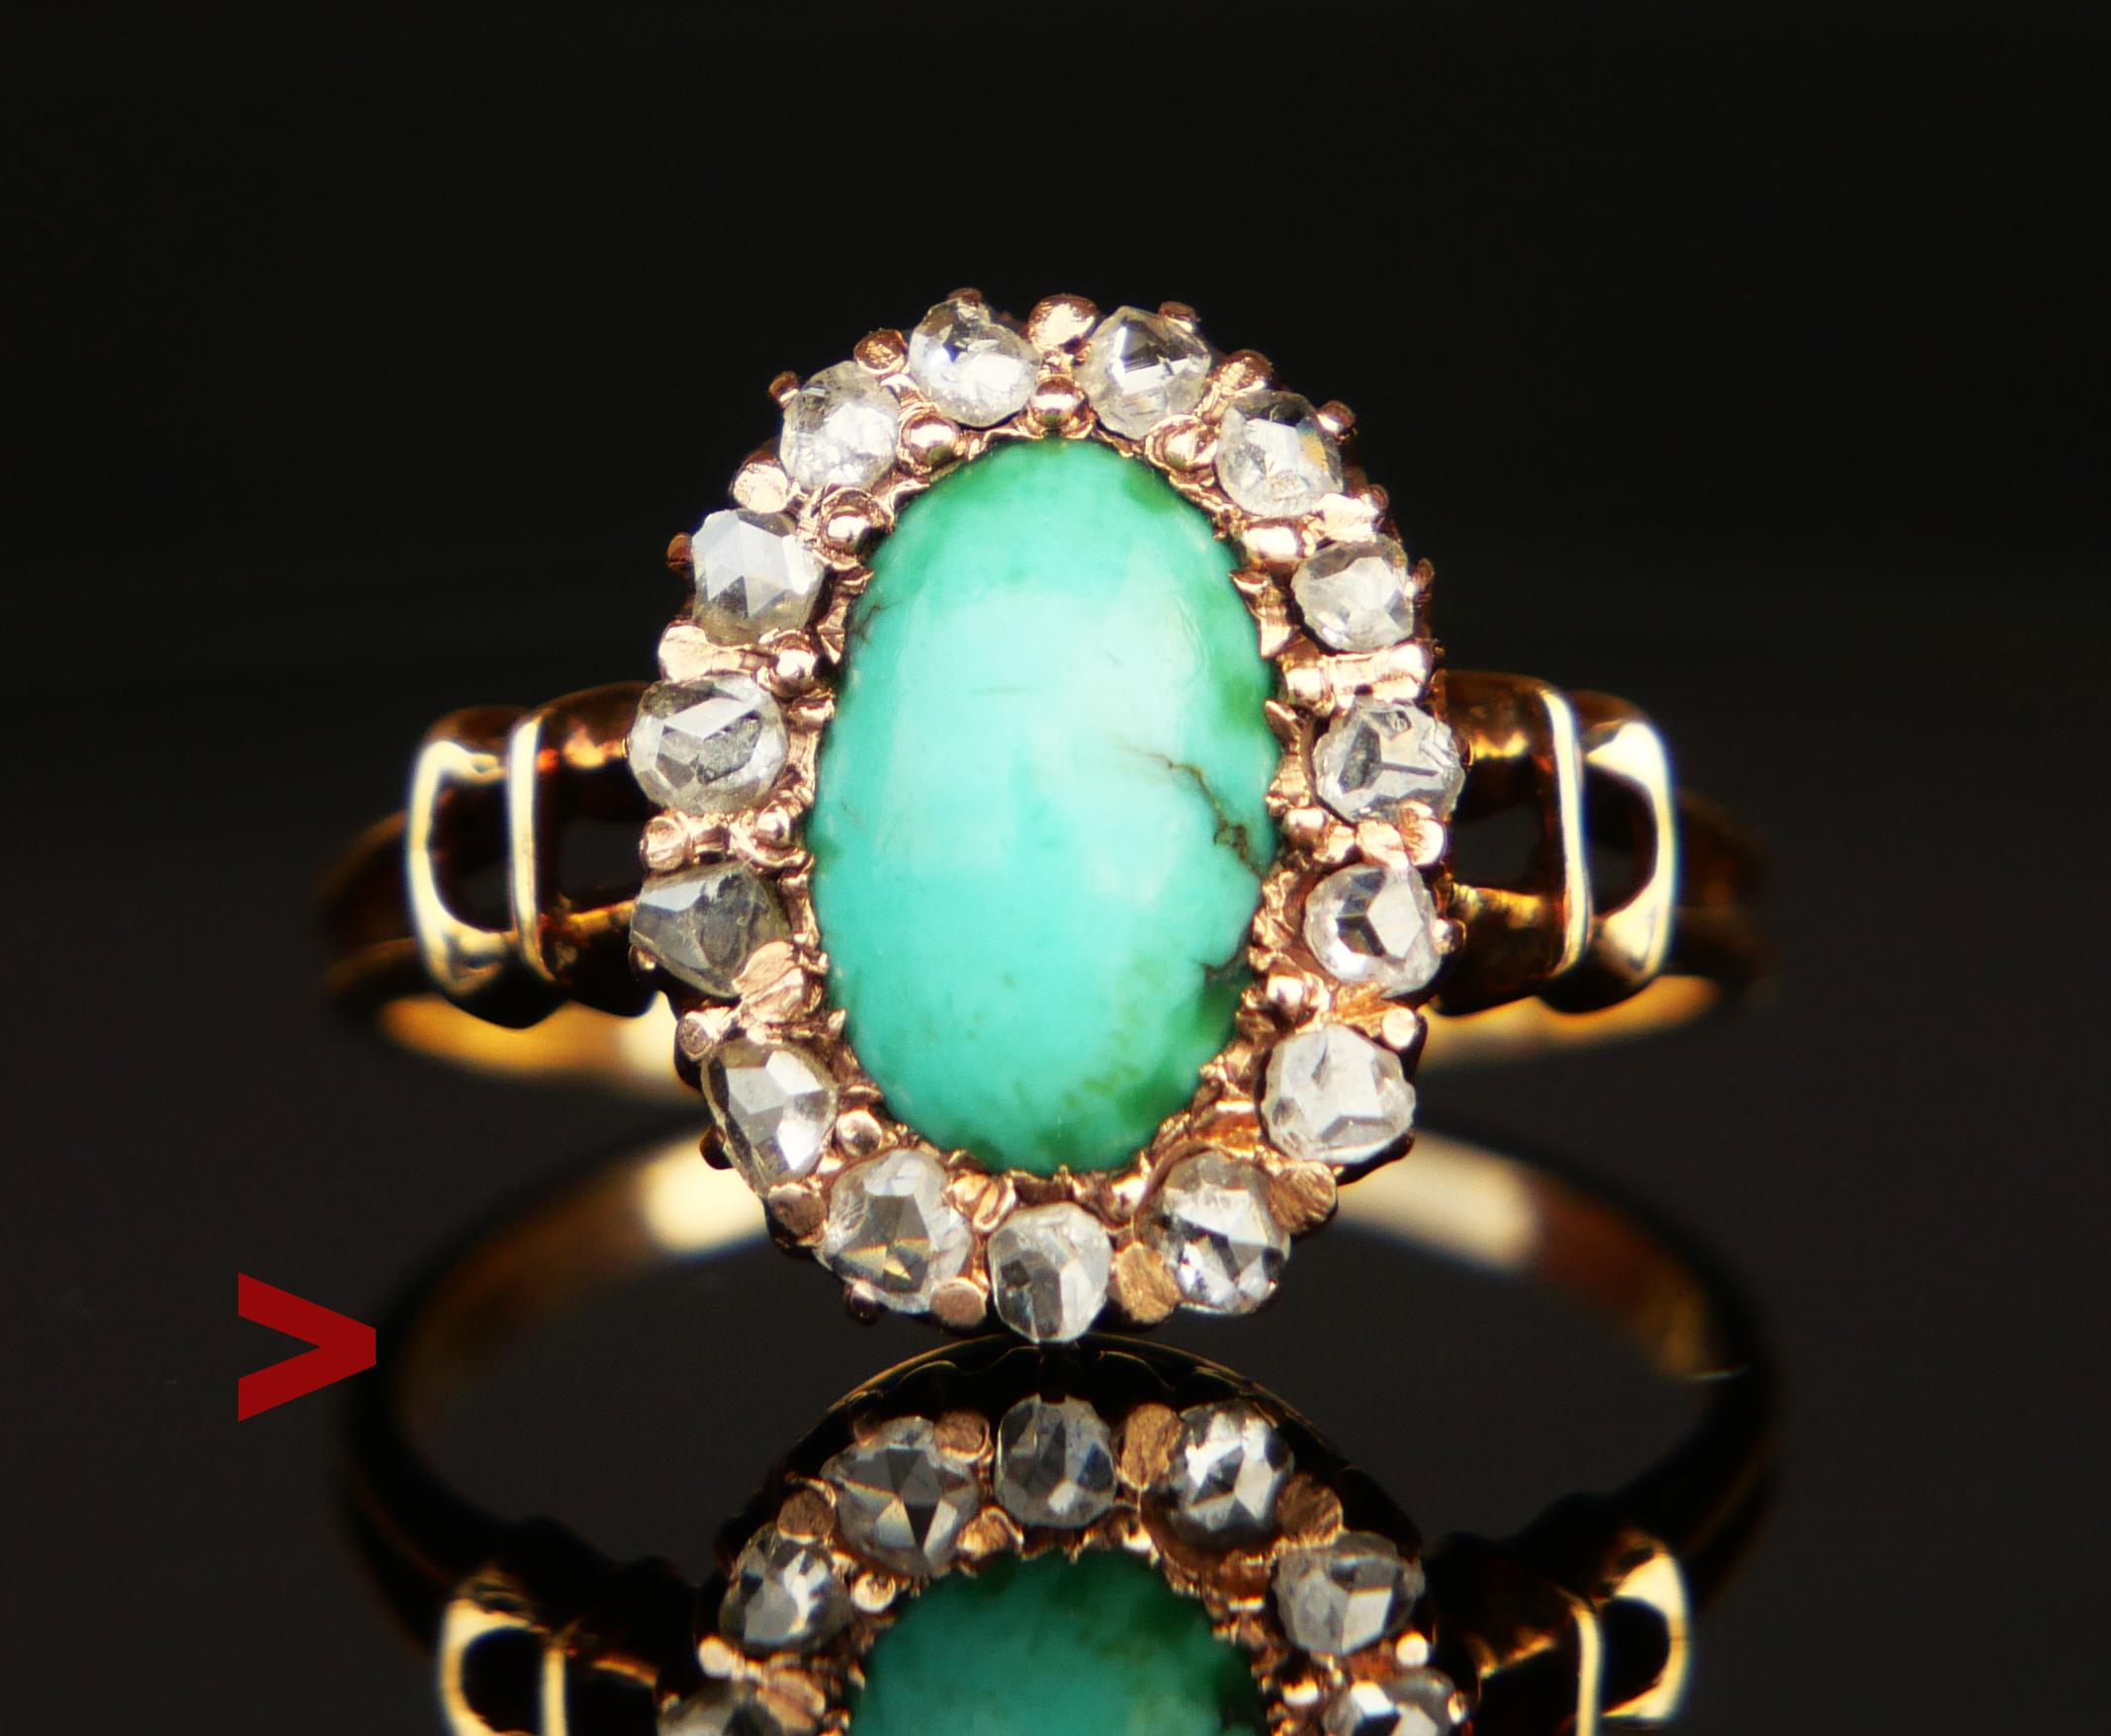 Beautiful German Halo Ring from ca. late 19th - early 20th century period.

Double band and crown 12mm x 10mm x 4.75mm deep in solid 14K Yellow Gold with mounted natural Turquoise cut cabochon 9 mm x 5.5 mm x 3.5 mm deep / ca 2.25ct and 15 rose cut